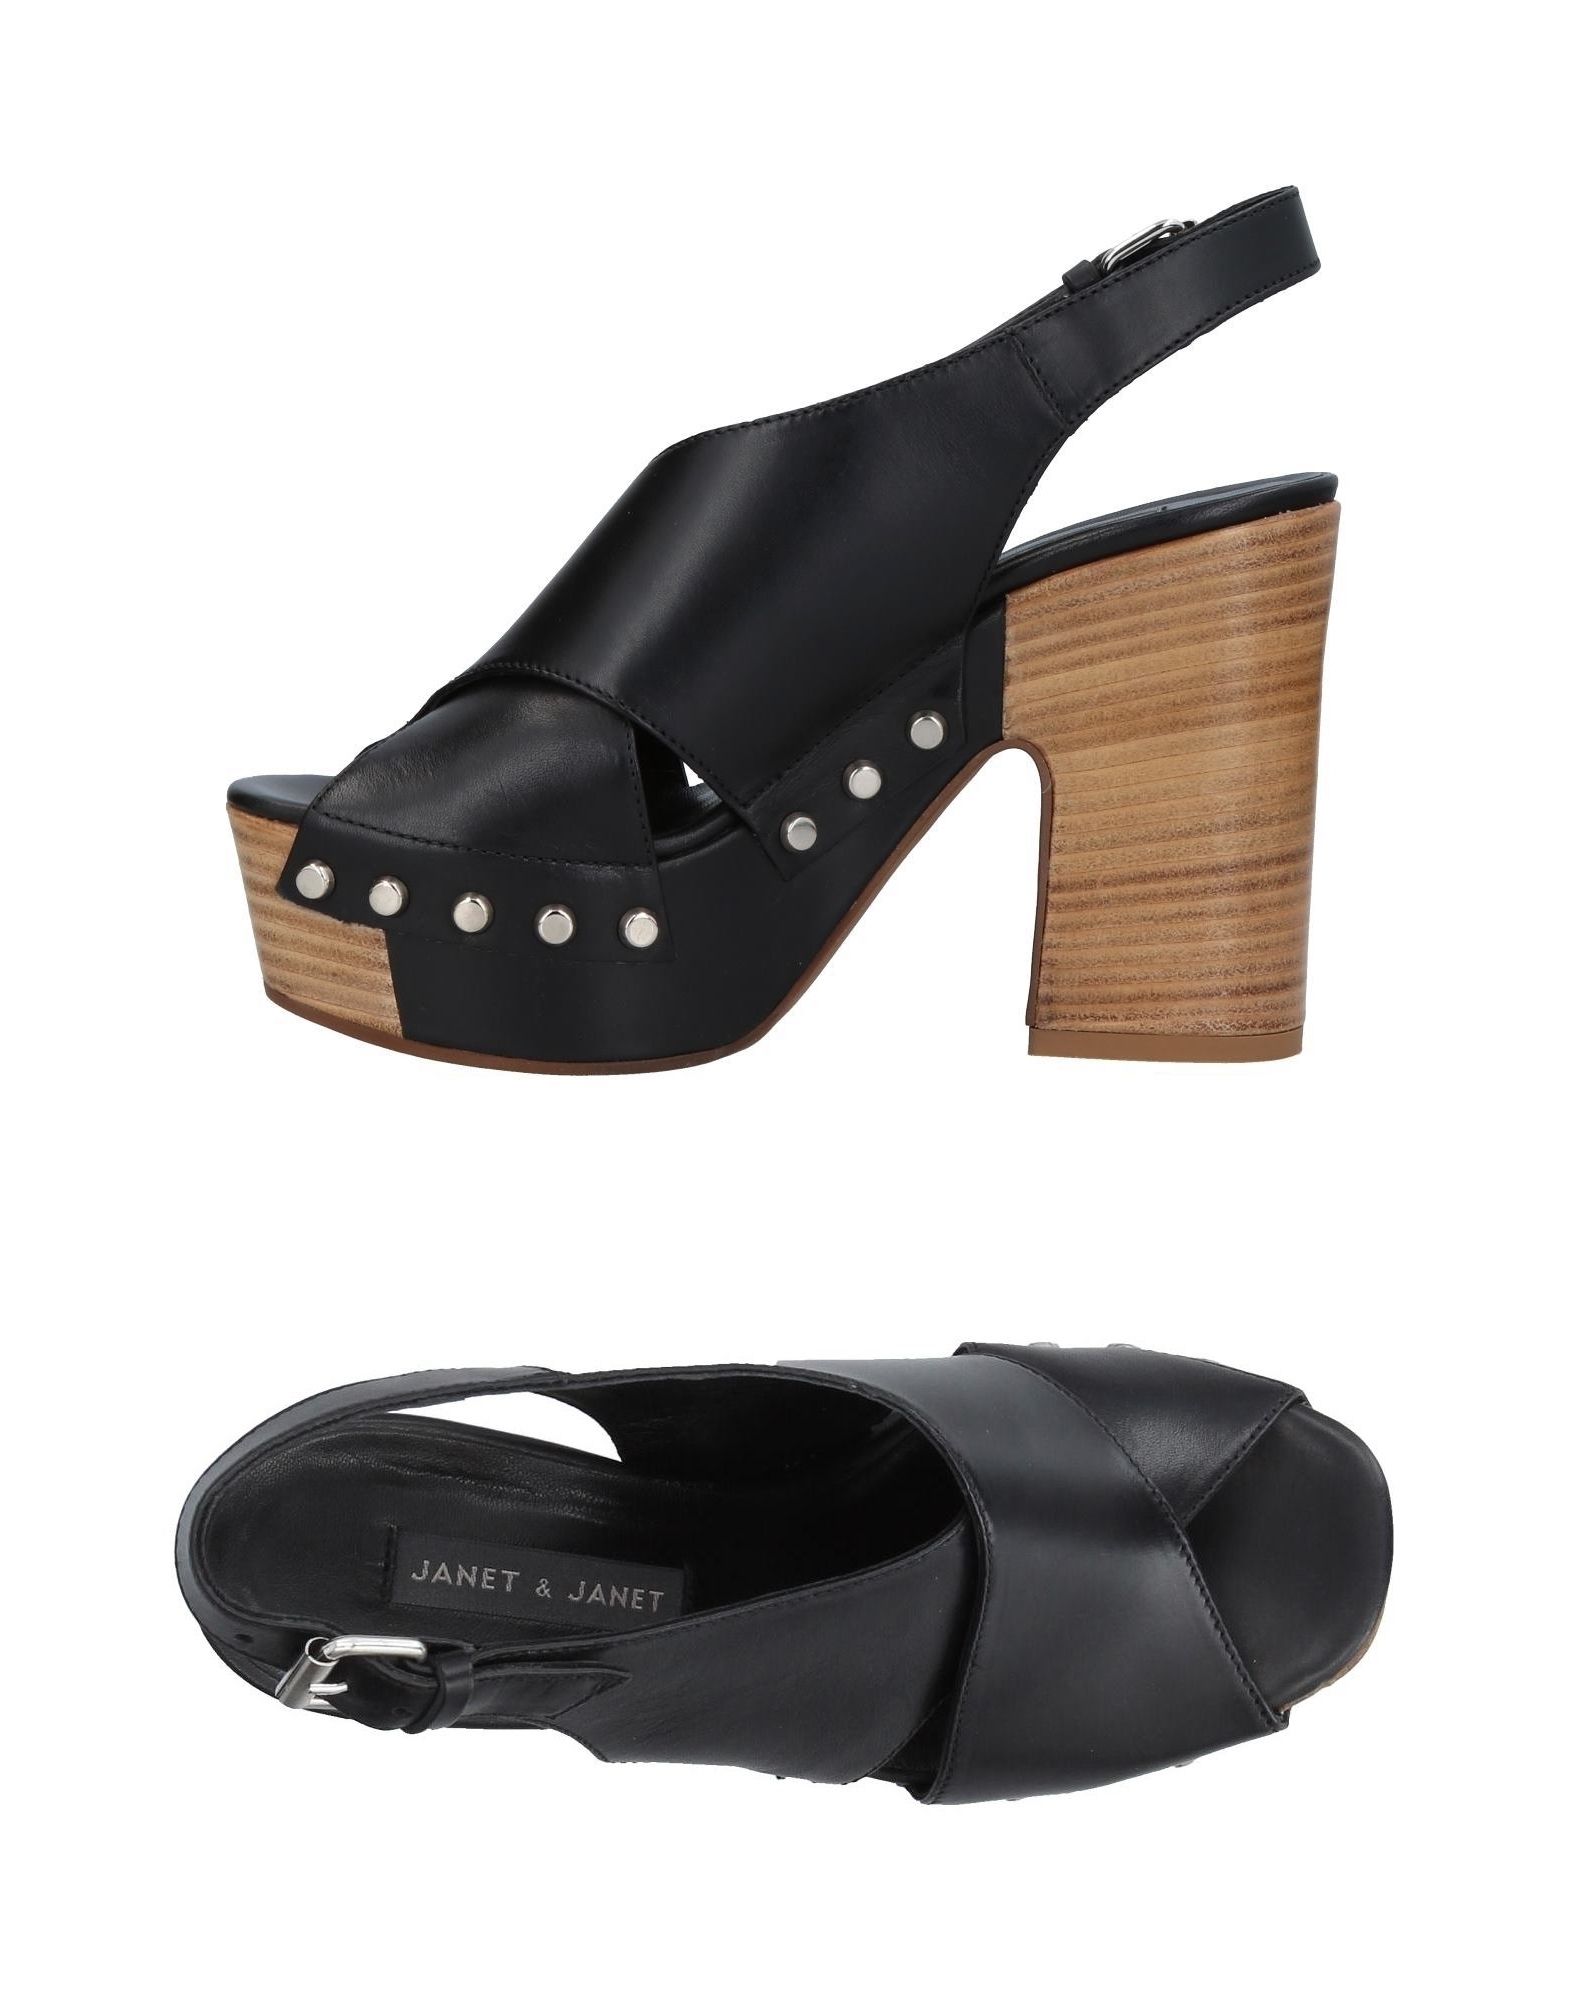 Janet \u0026 Janet Sandals - Women Janet \u0026 Janet Sandals online on YOOX United  States - 11400196CL